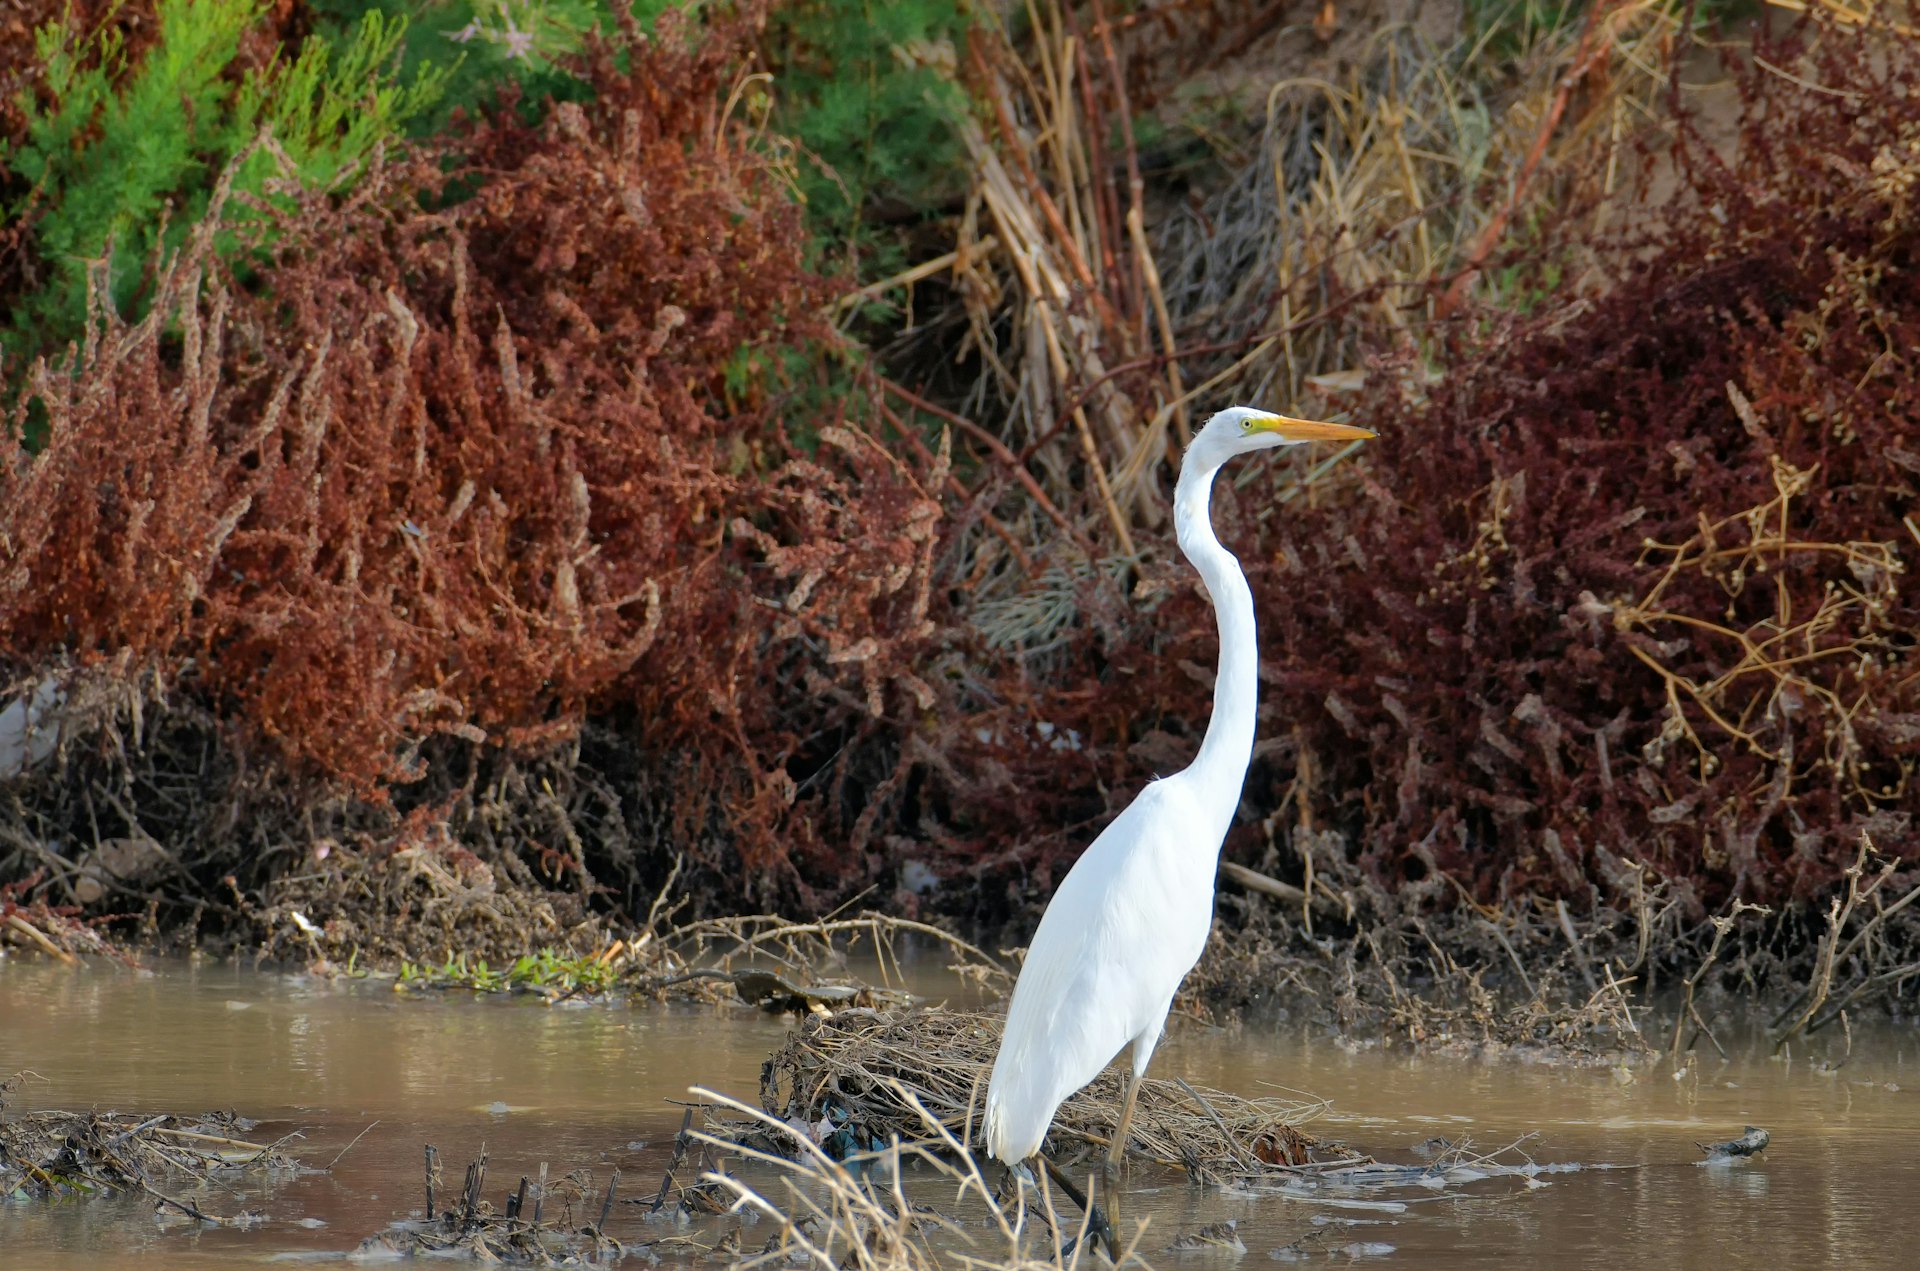 A white great egret wades in the water at Rio Bosque Wetlands Park, El Paso, Texas